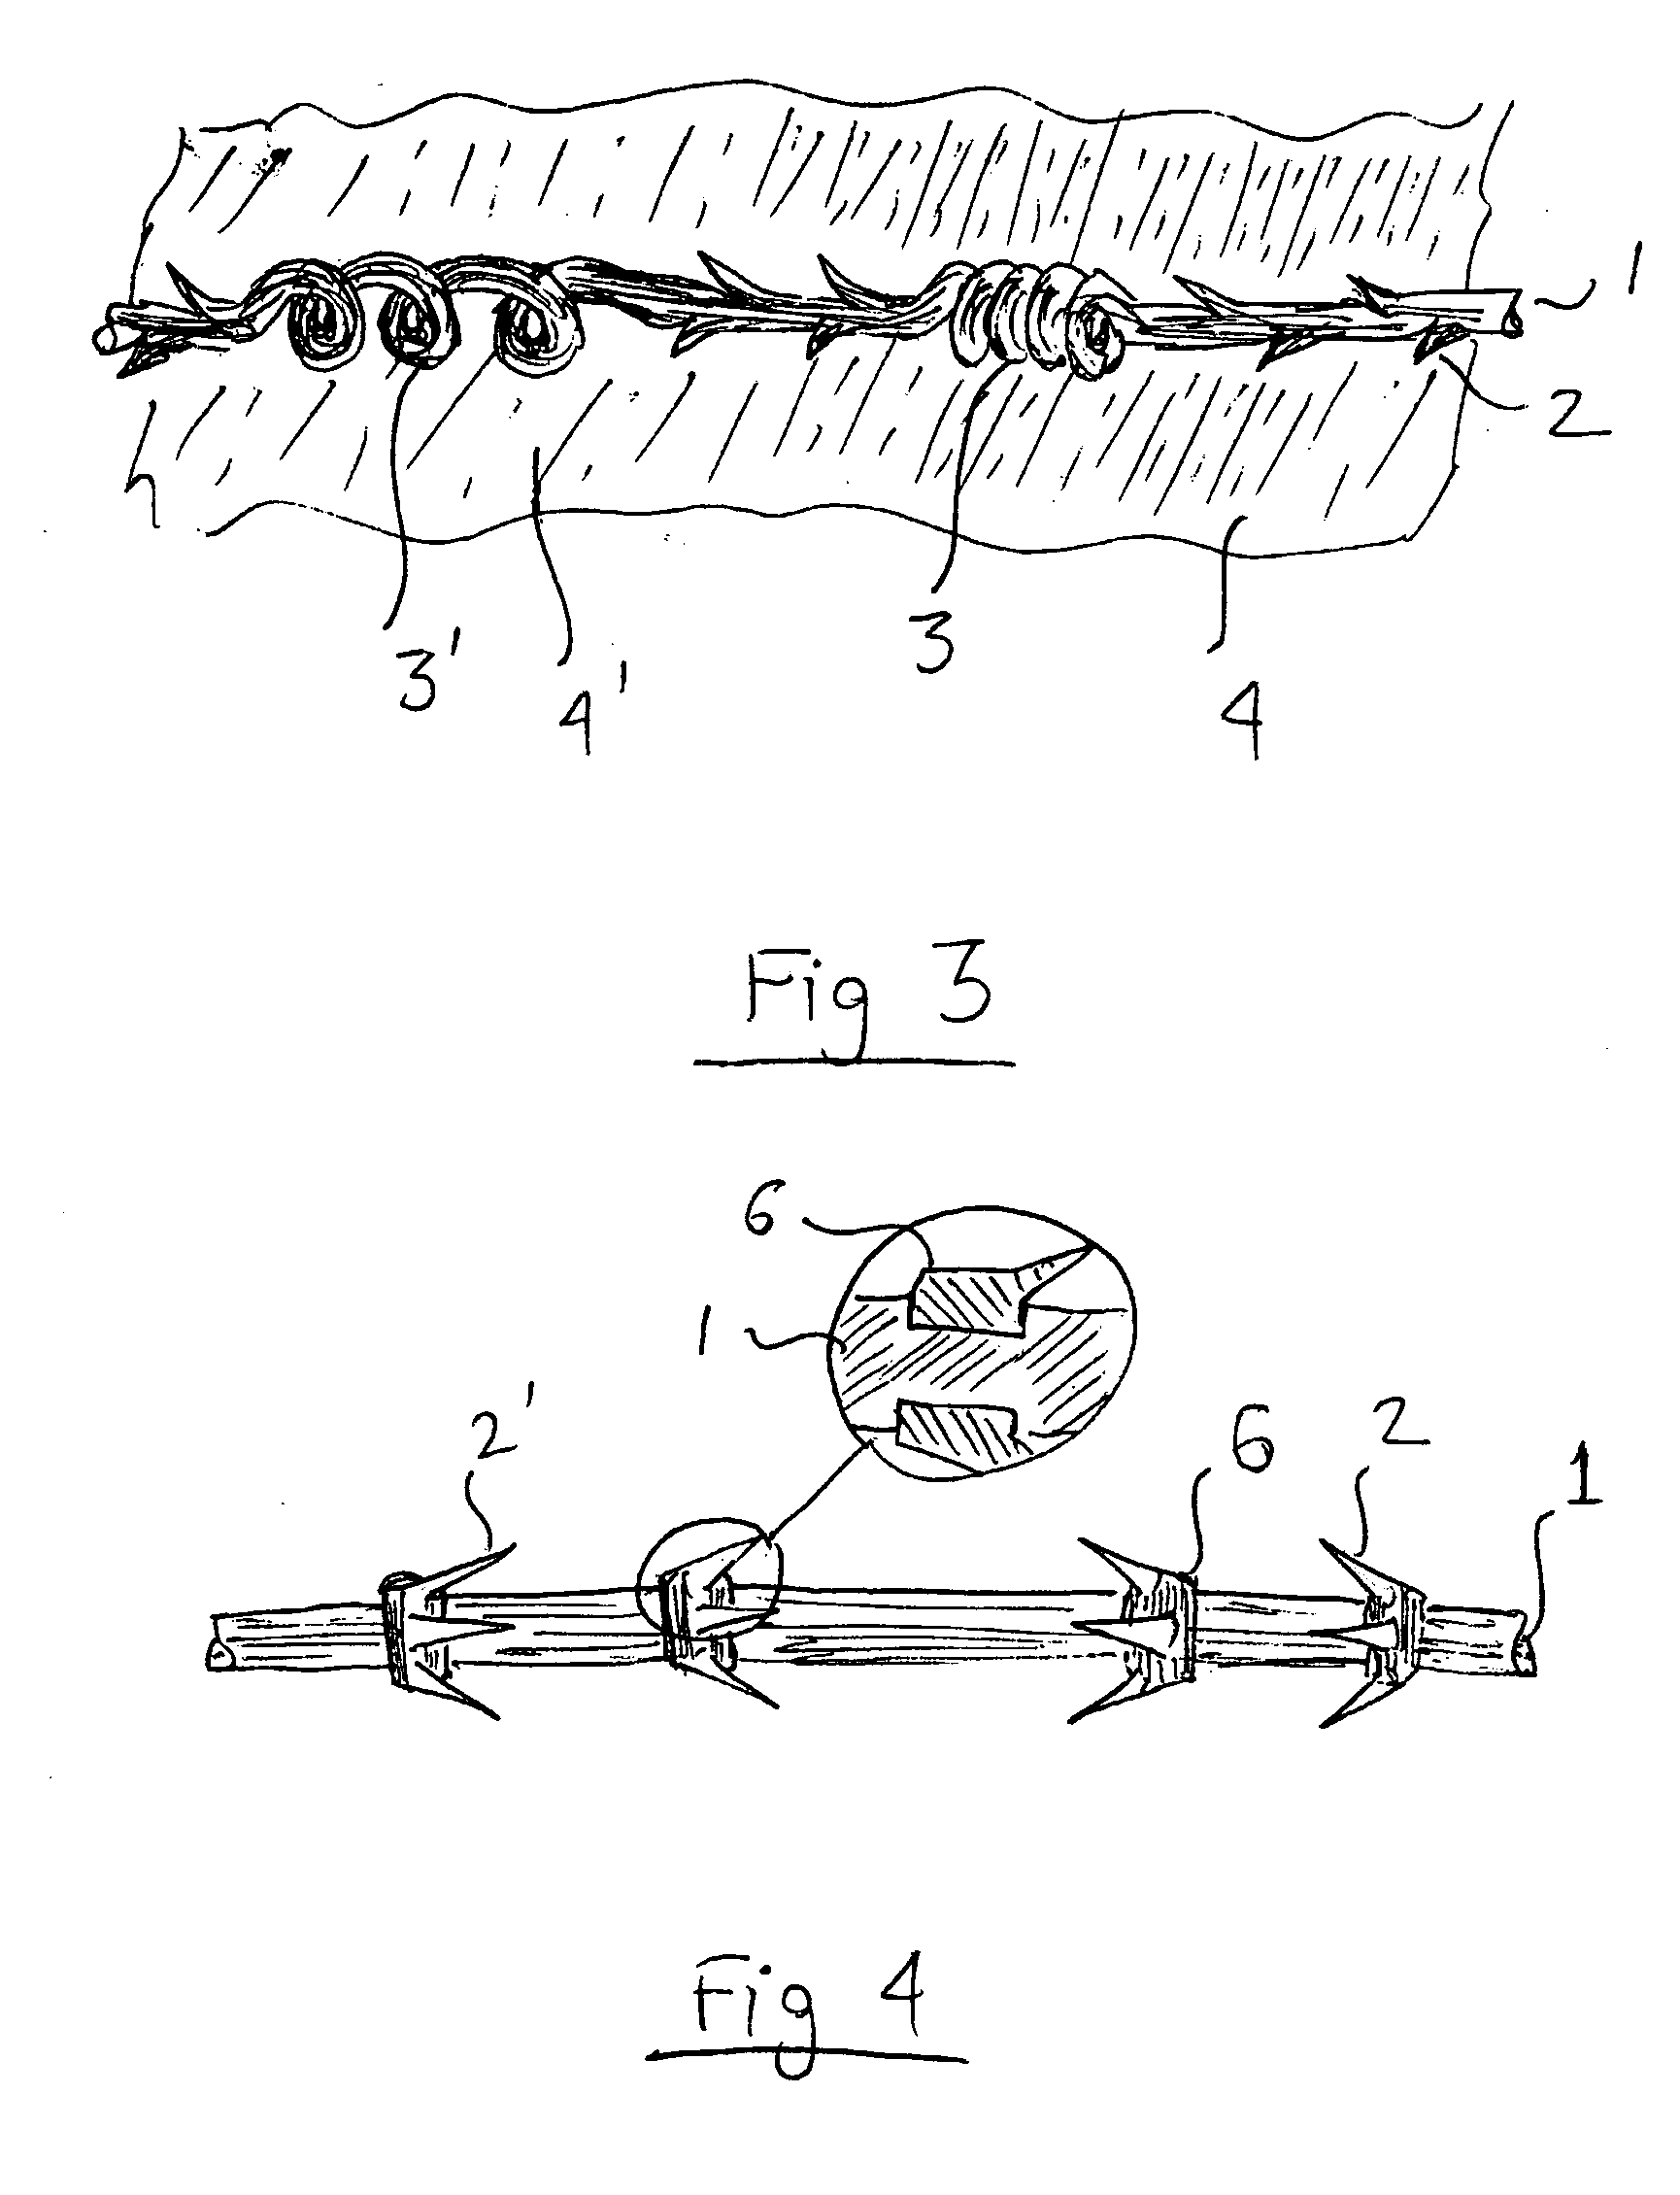 Elastic barbed suture and tissue support system